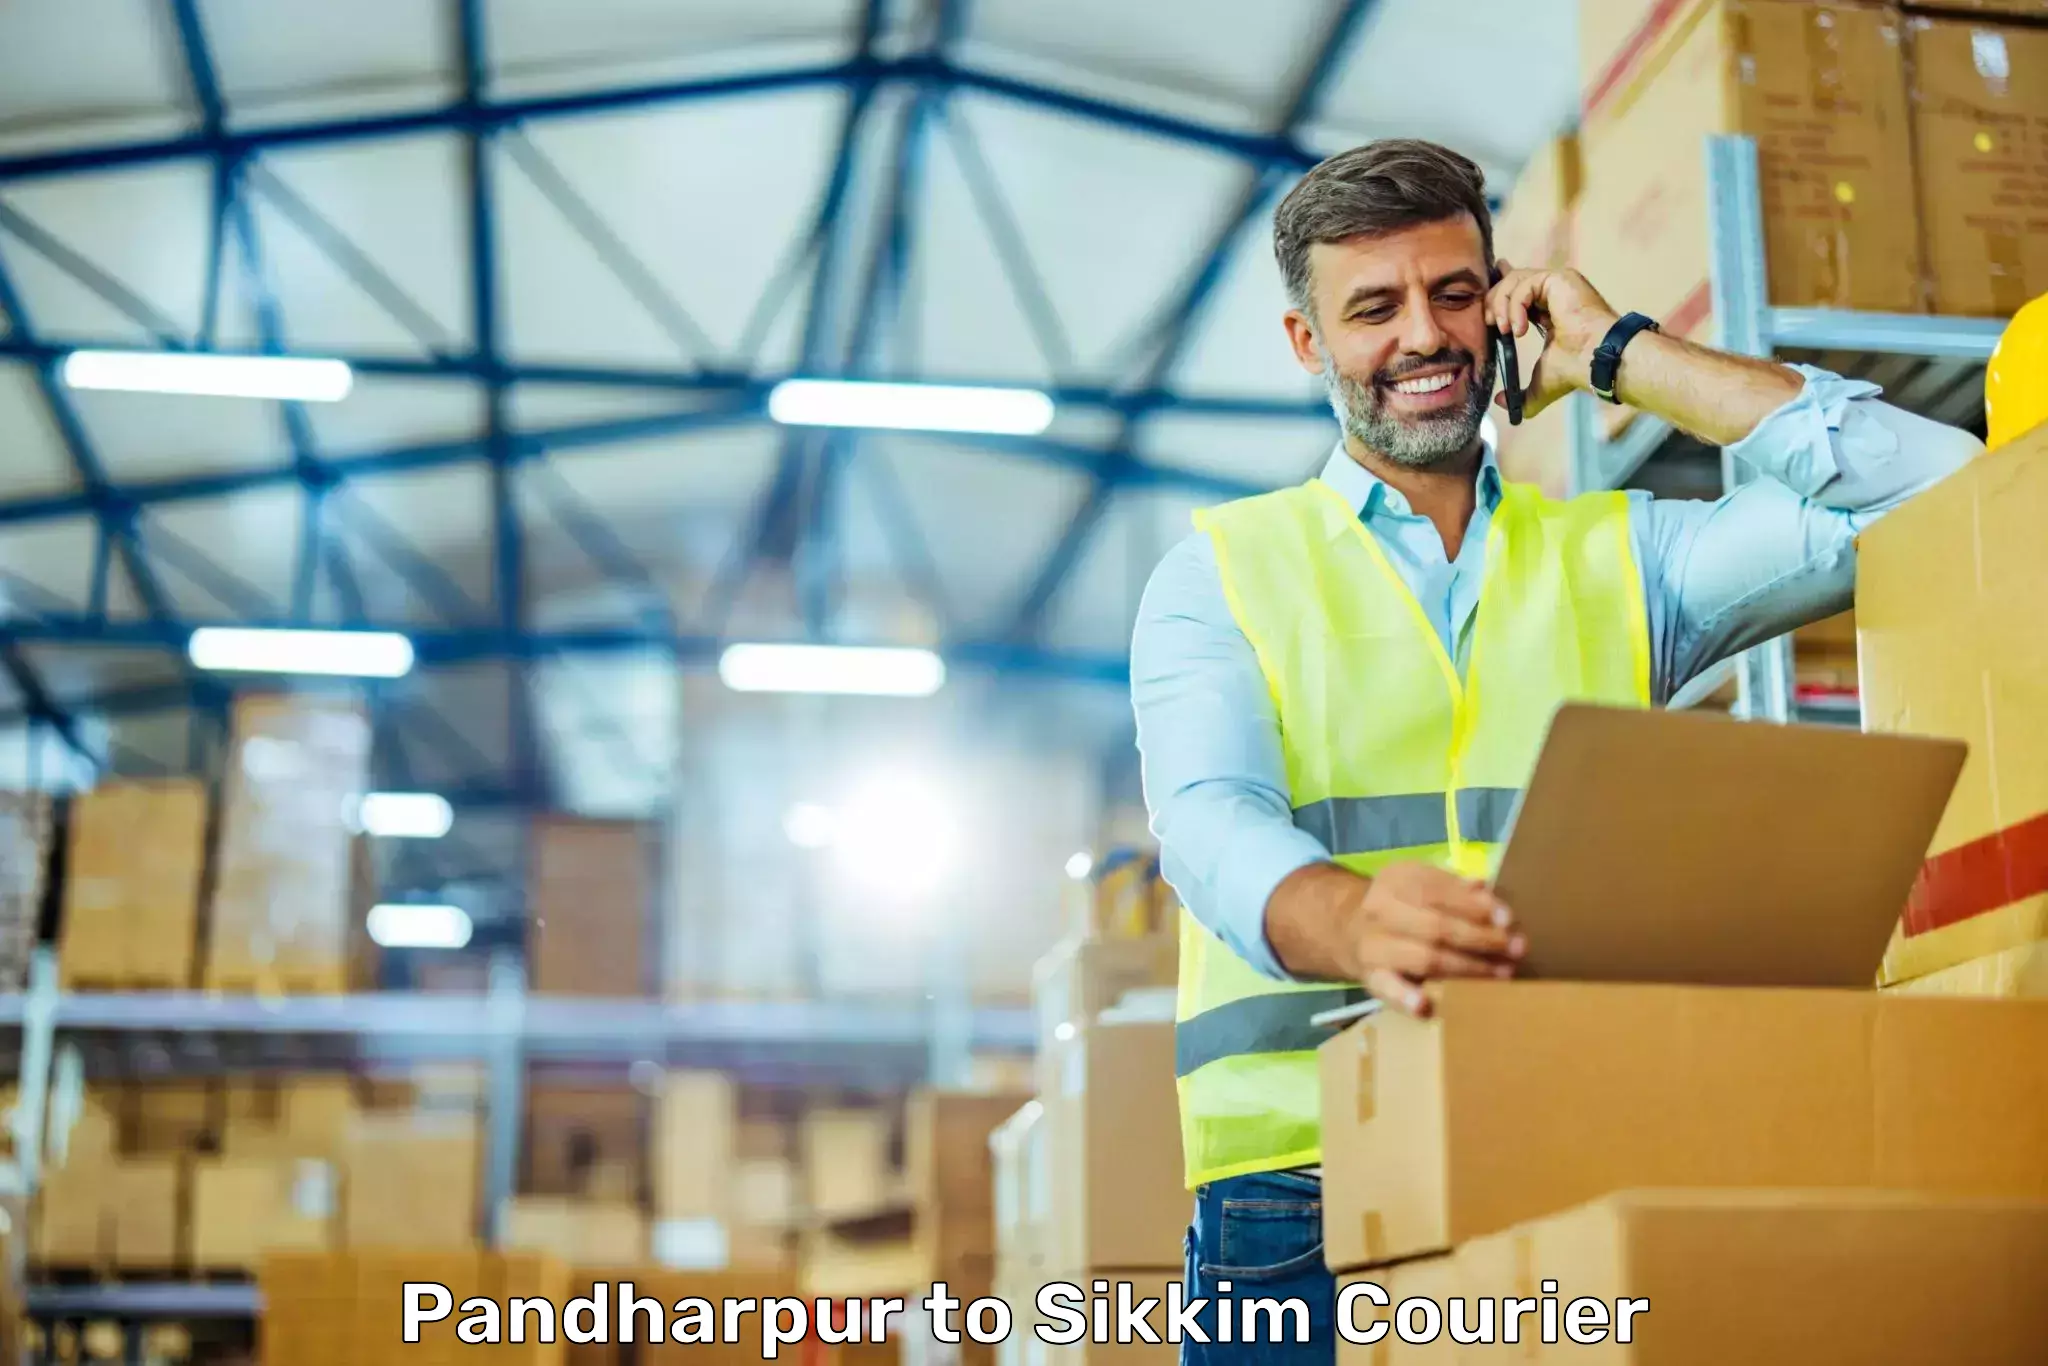 Smart shipping technology Pandharpur to South Sikkim